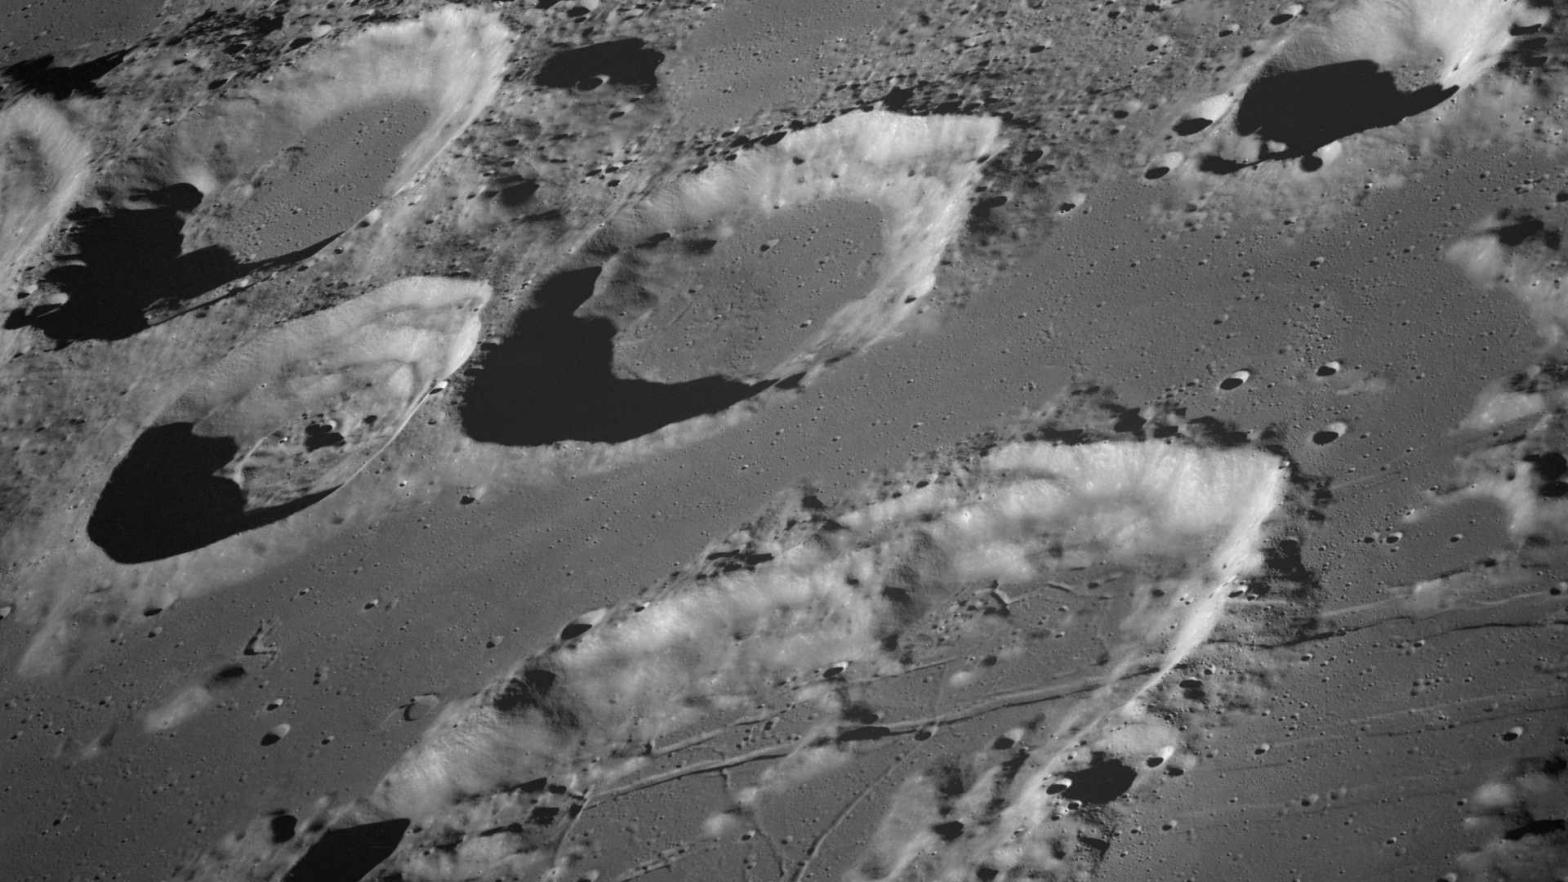 Several craters on the surface of the moon in a black-and-white photo